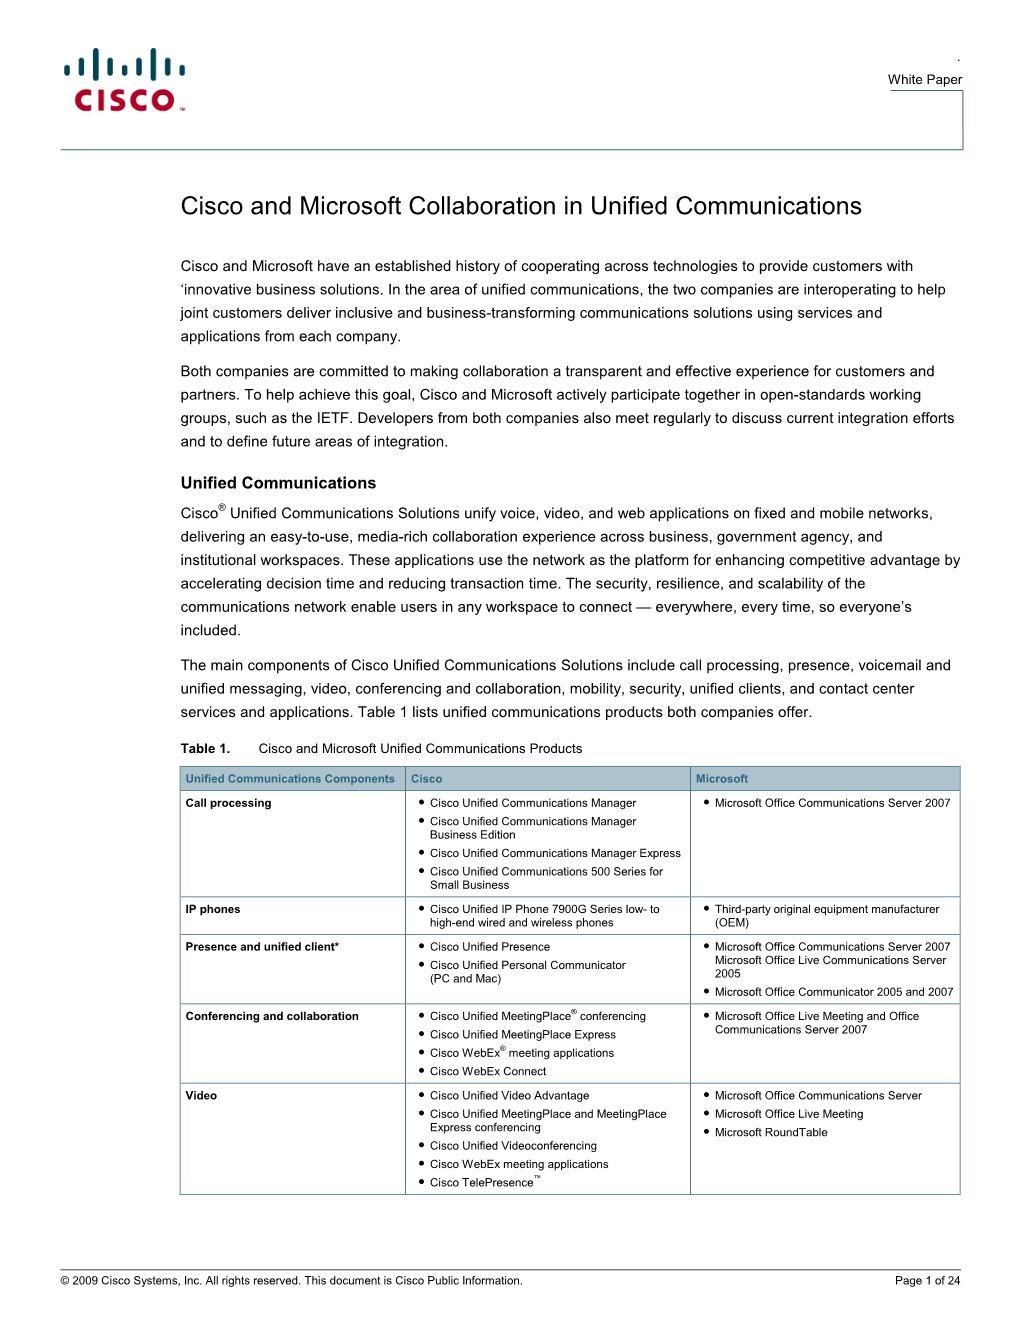 Cisco and Microsoft Collaboration in Unified Communications